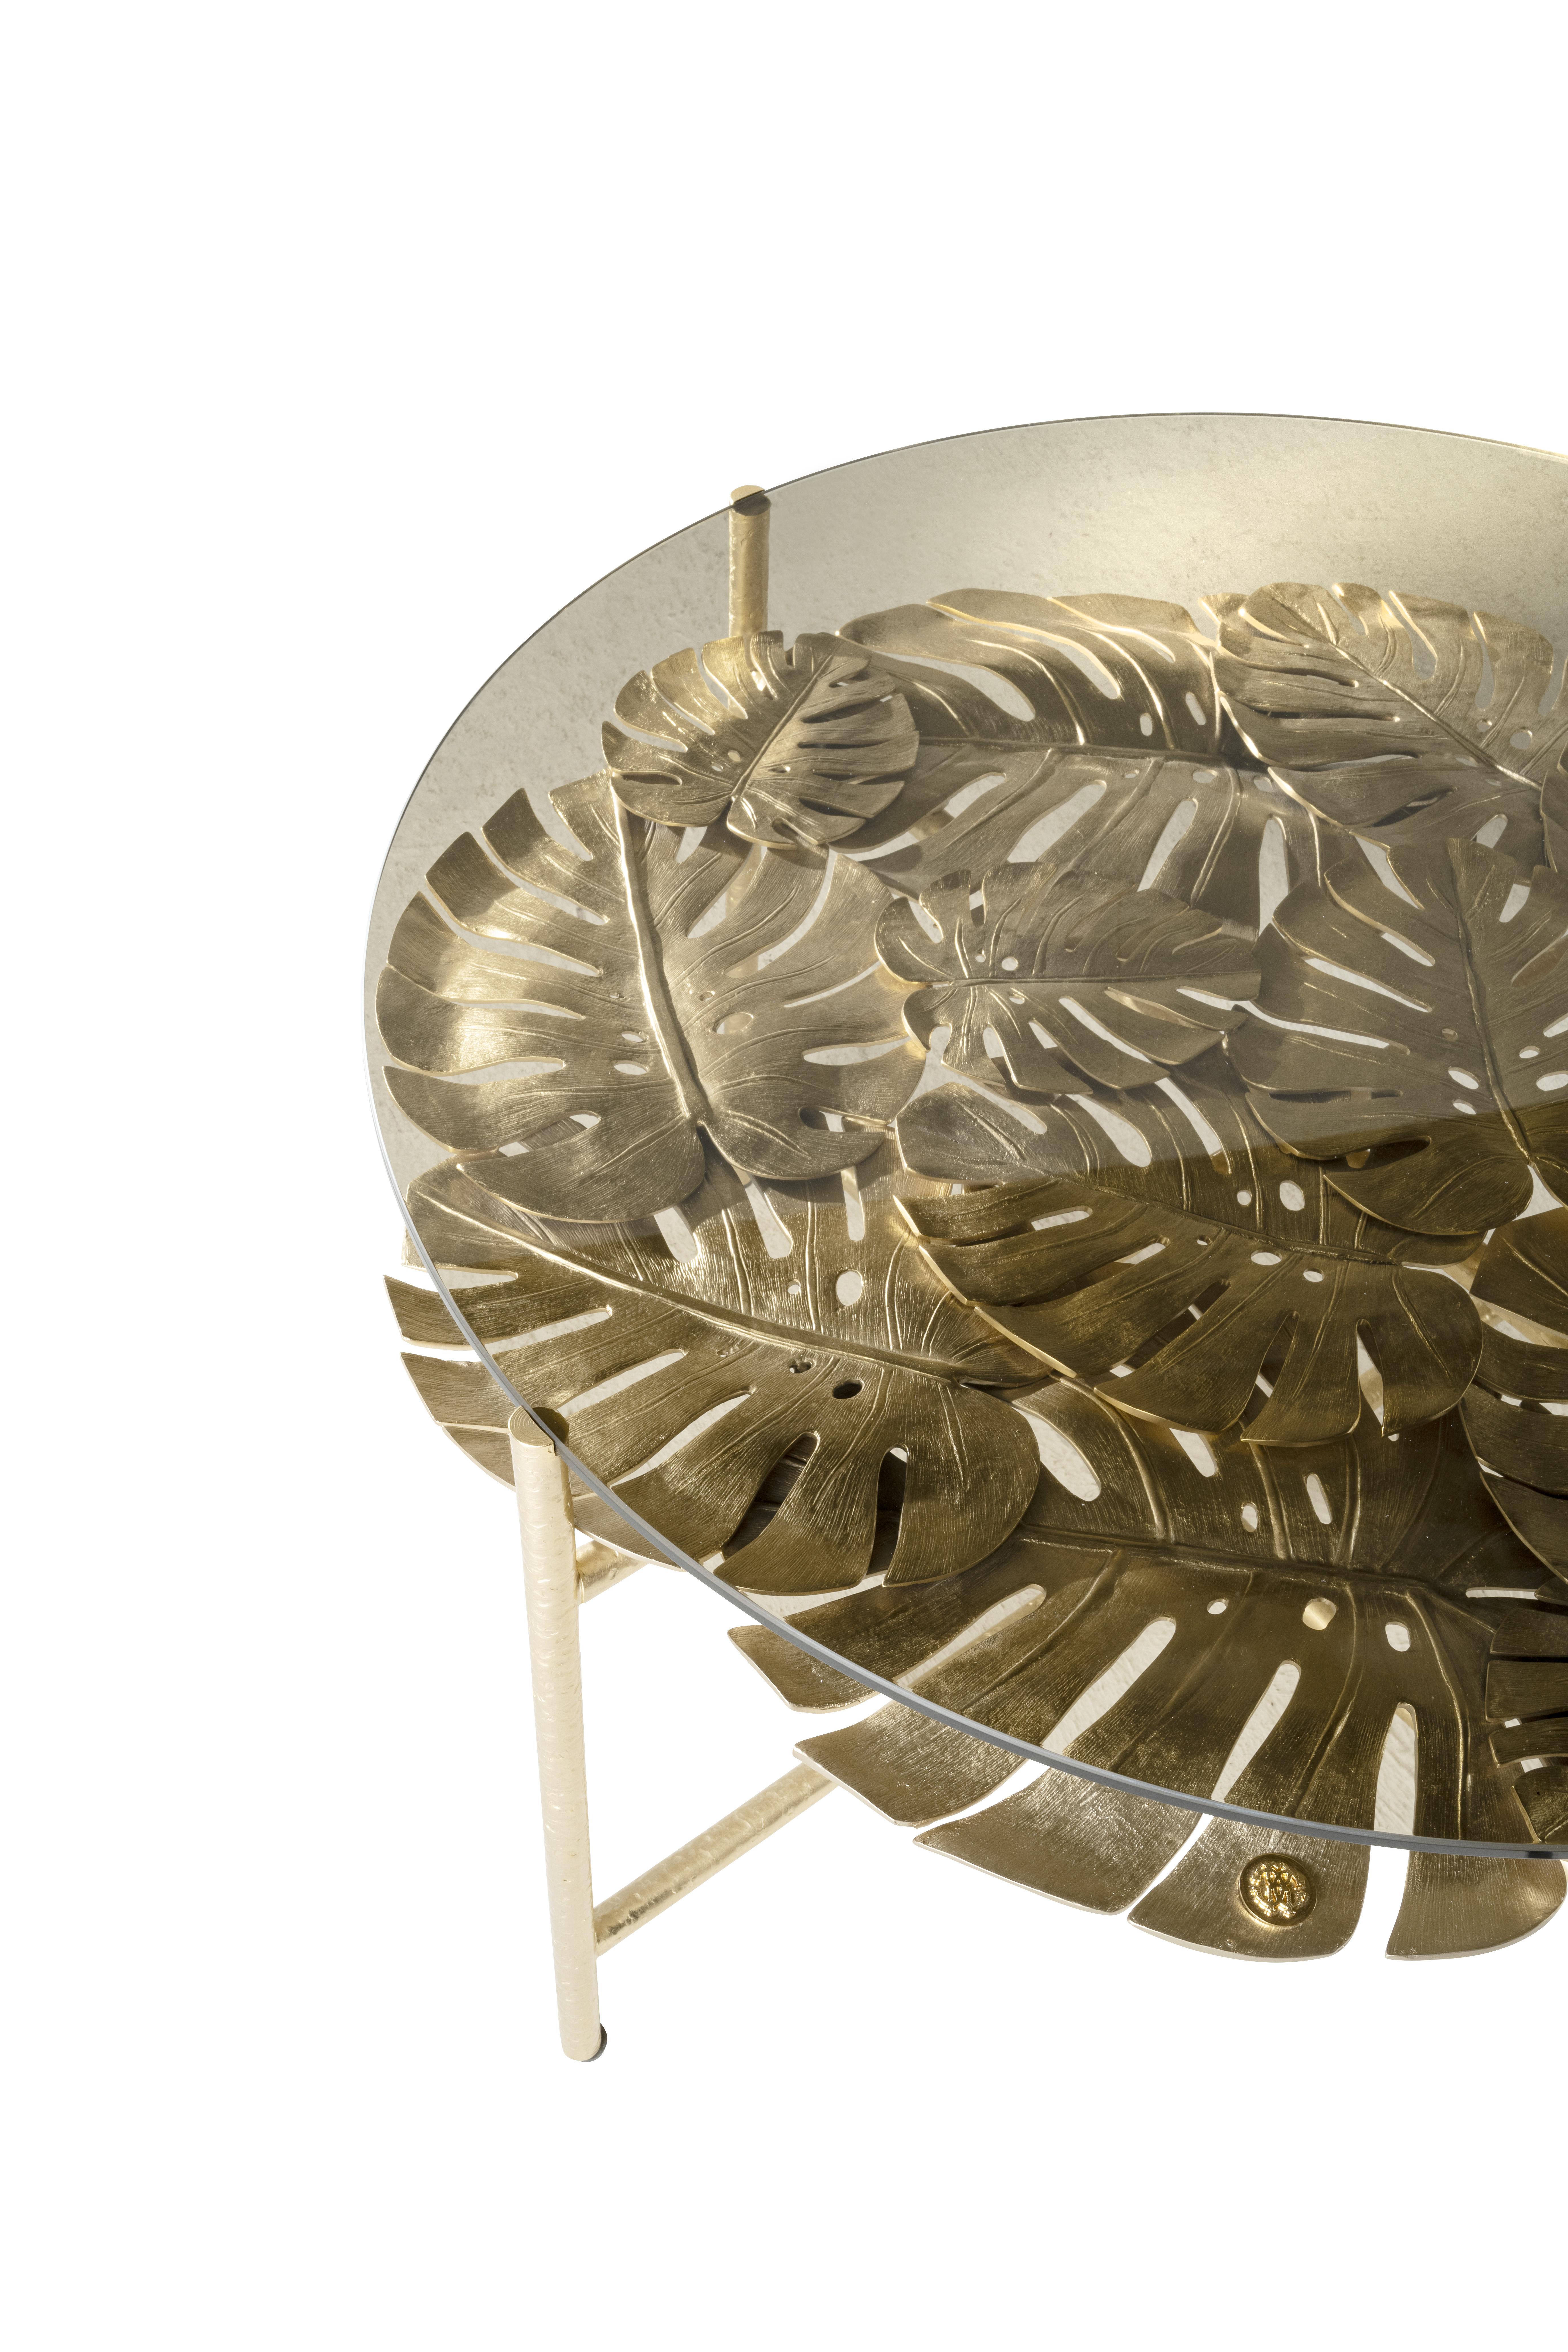 Italian 21st Century Maui Side Table in Brass by Roberto Cavalli Home Interiors For Sale